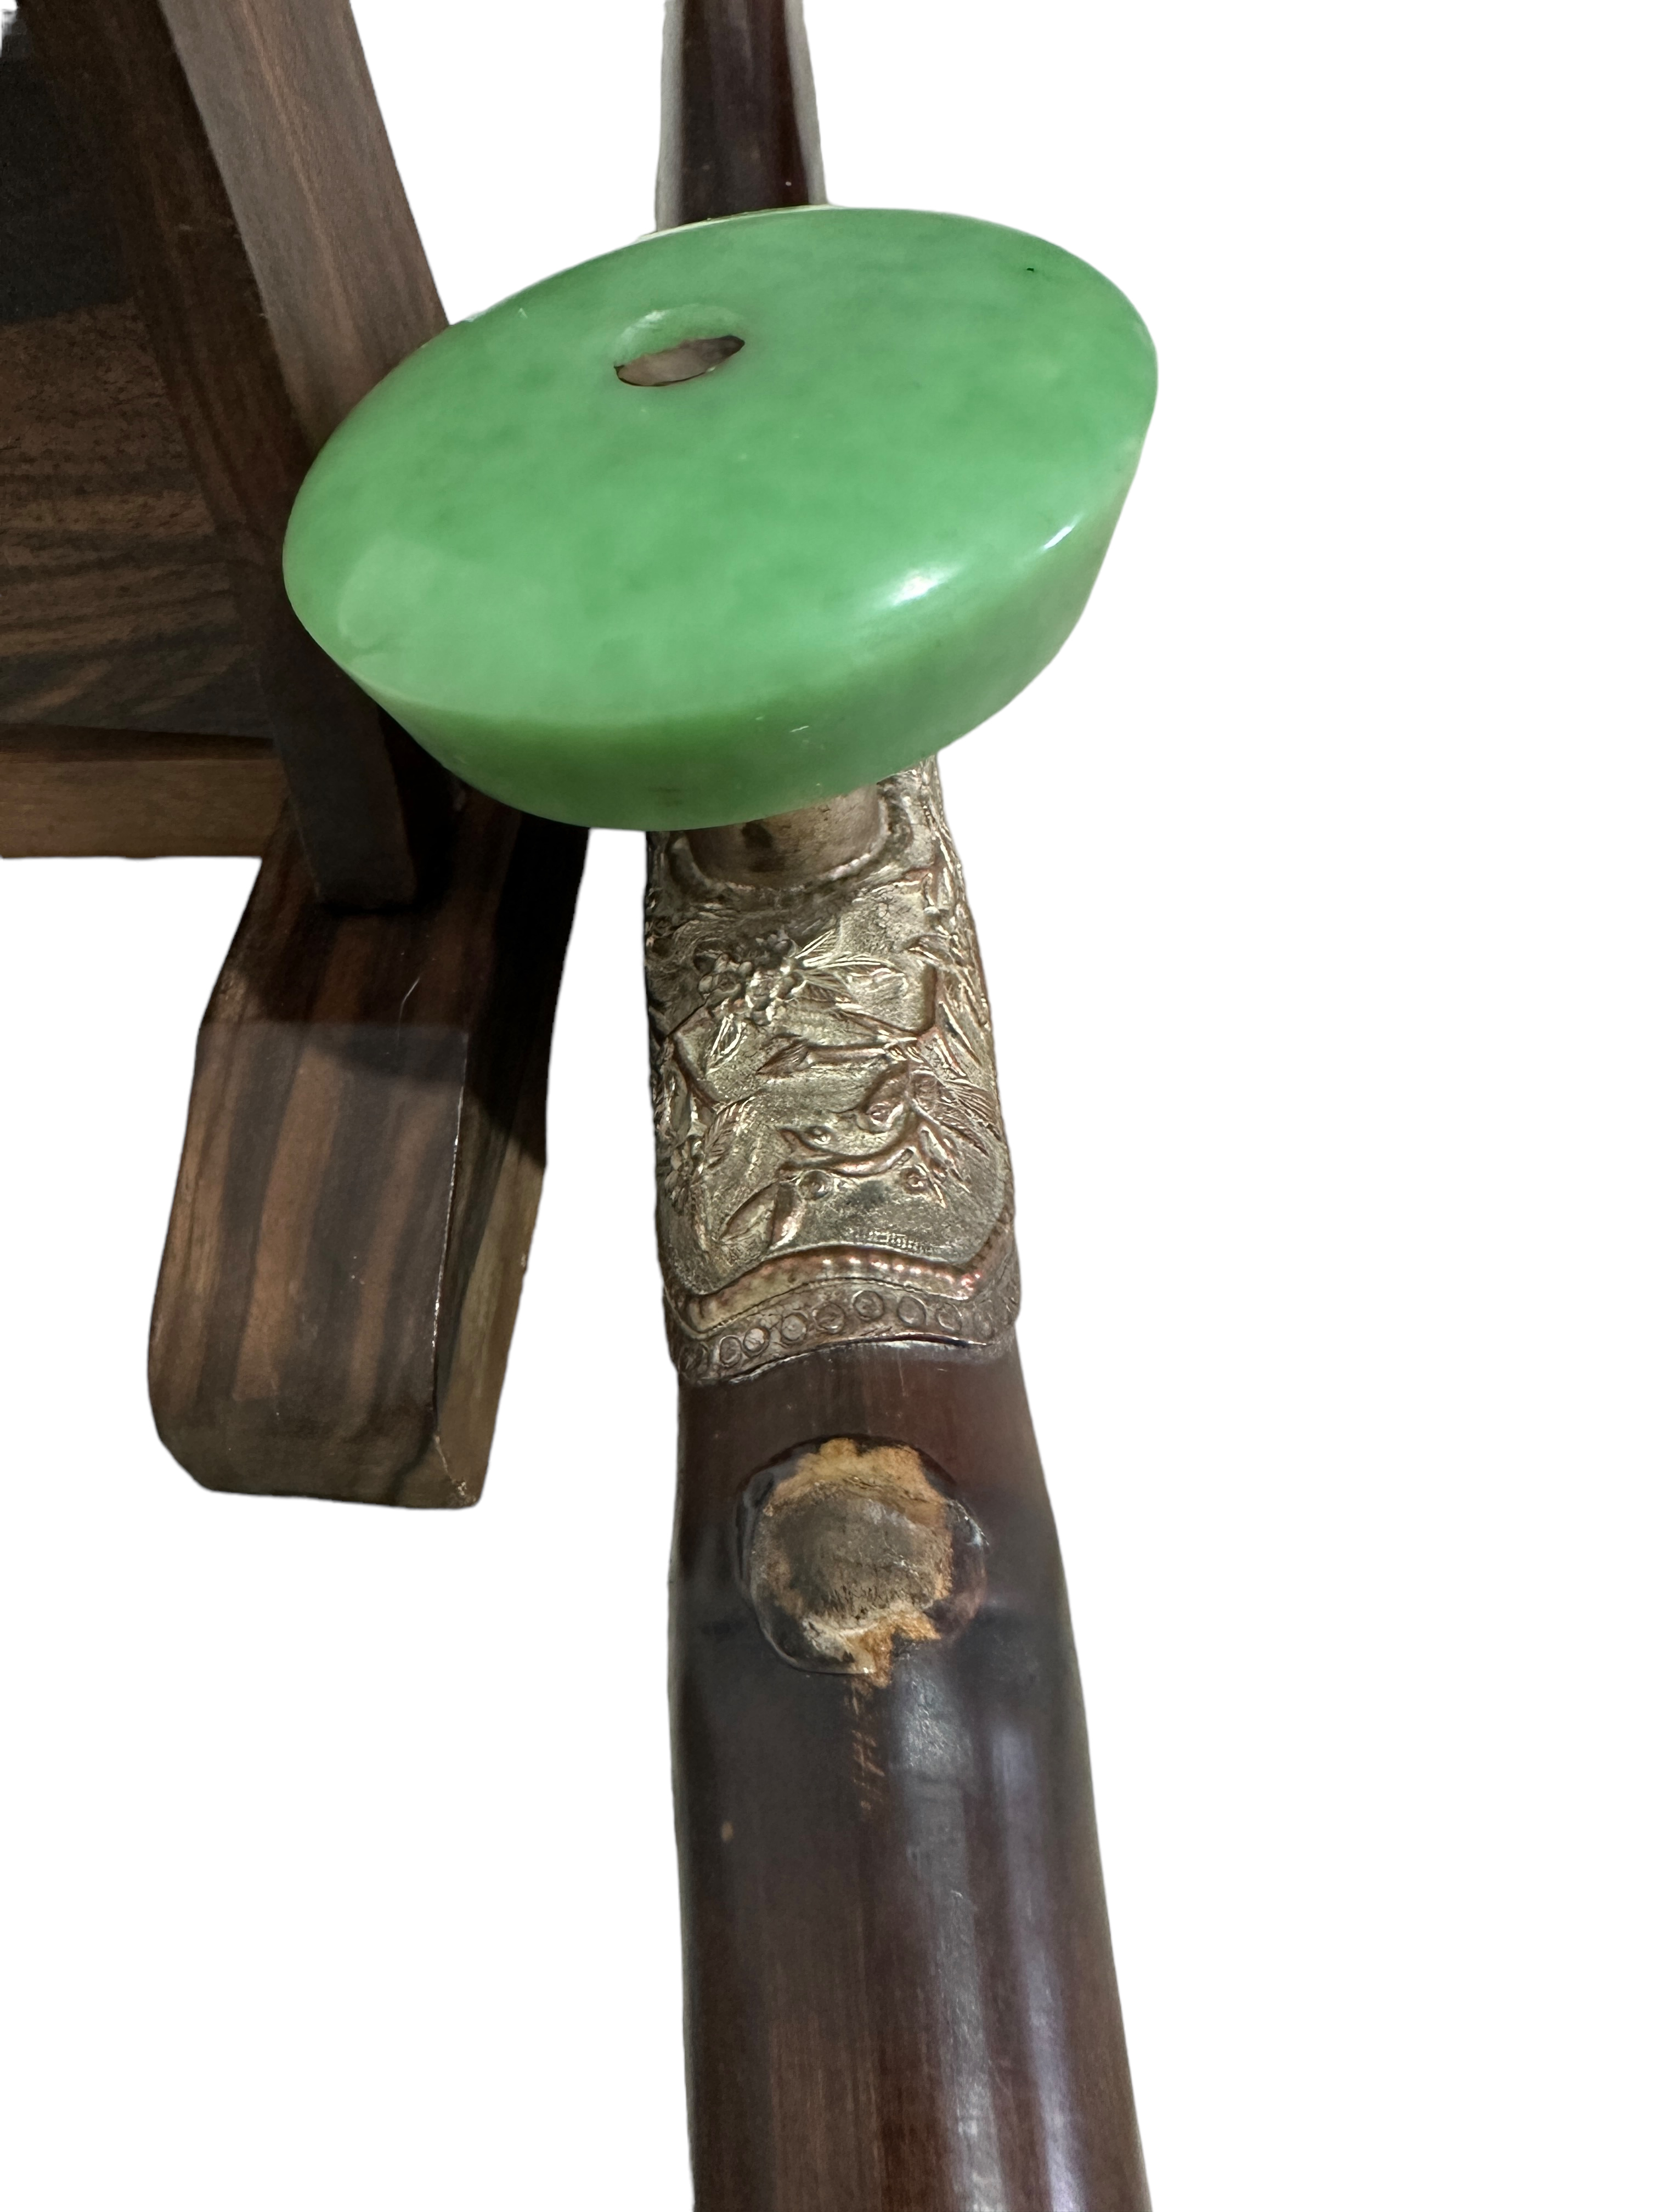 Lot of Opium Pipe with Jade Fittings on Stand-Bone and Wood Opium Pipes+2 Resin examples - Image 5 of 11